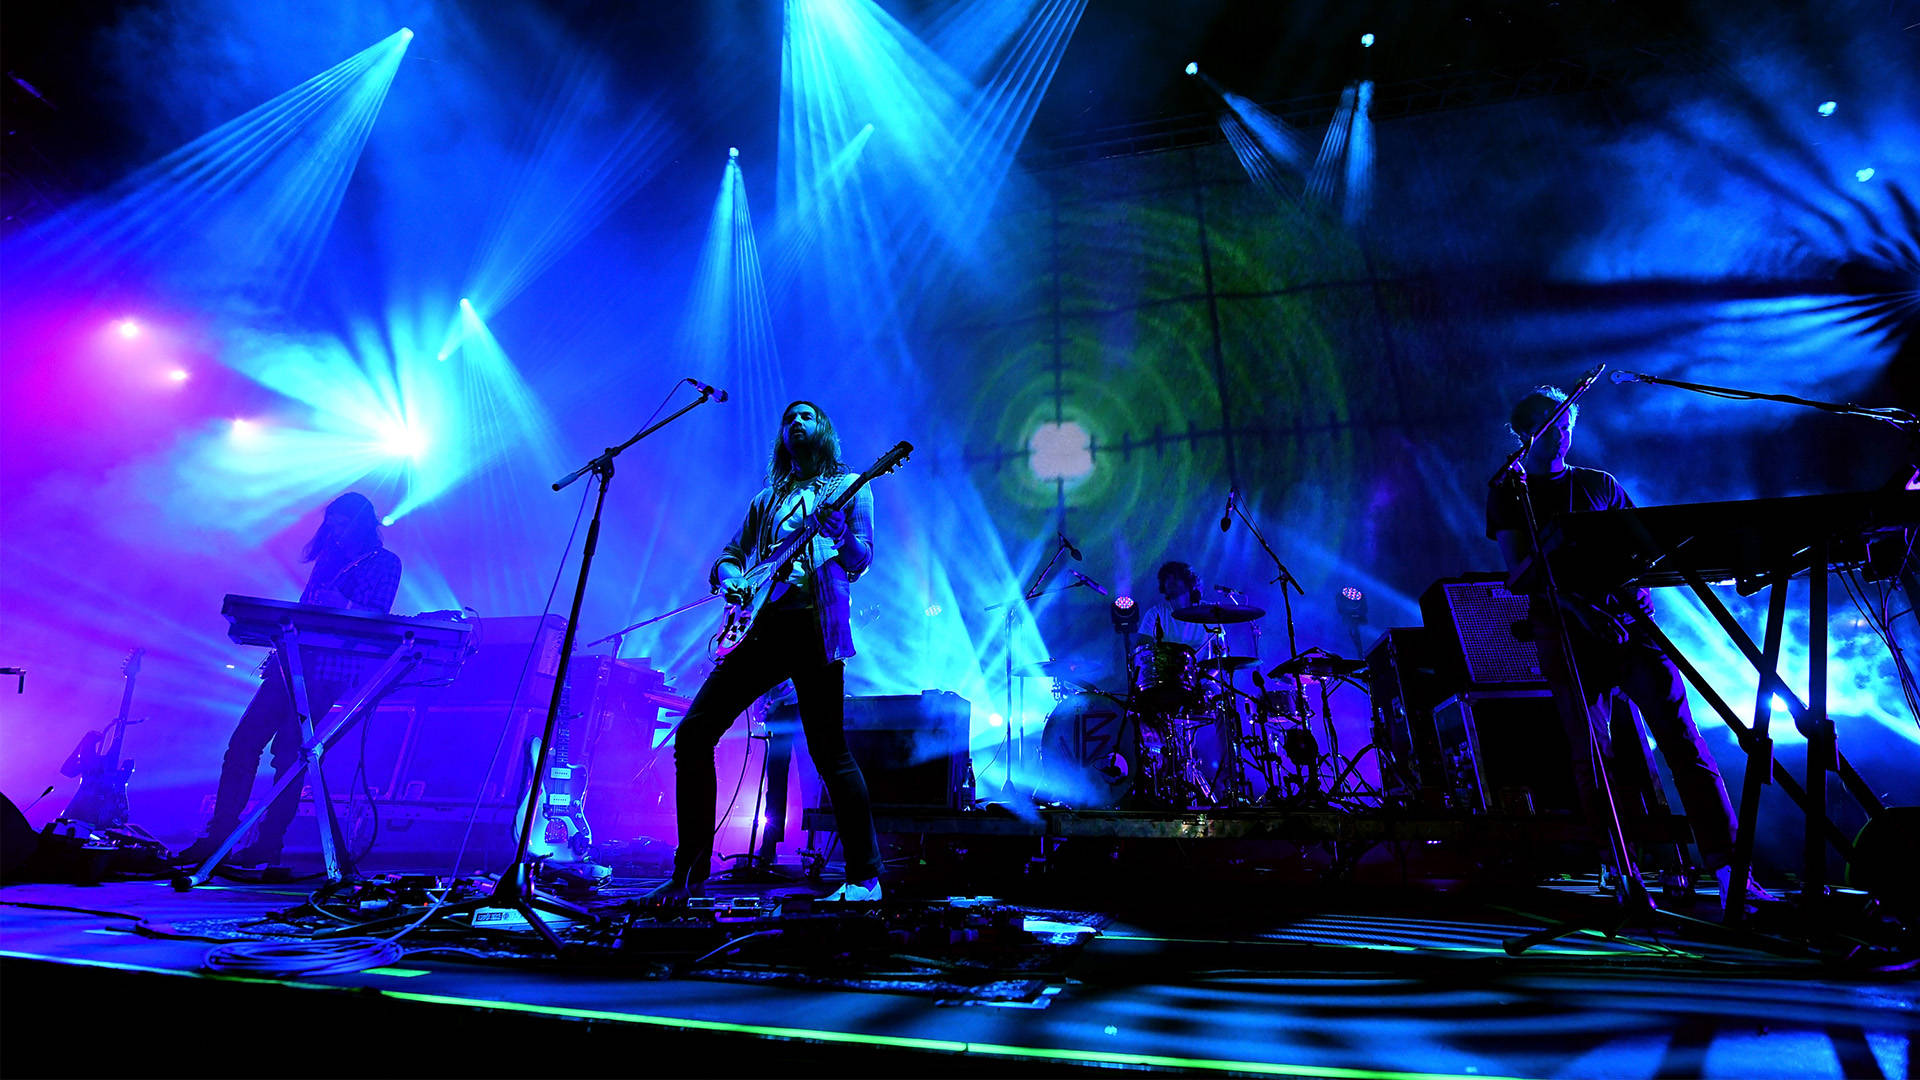 Tame Impala performs onstage during FYF Fest 2016 at Los Angeles Sports Arena on August 27, 2016. Kevin Winter/Getty Images for FYF